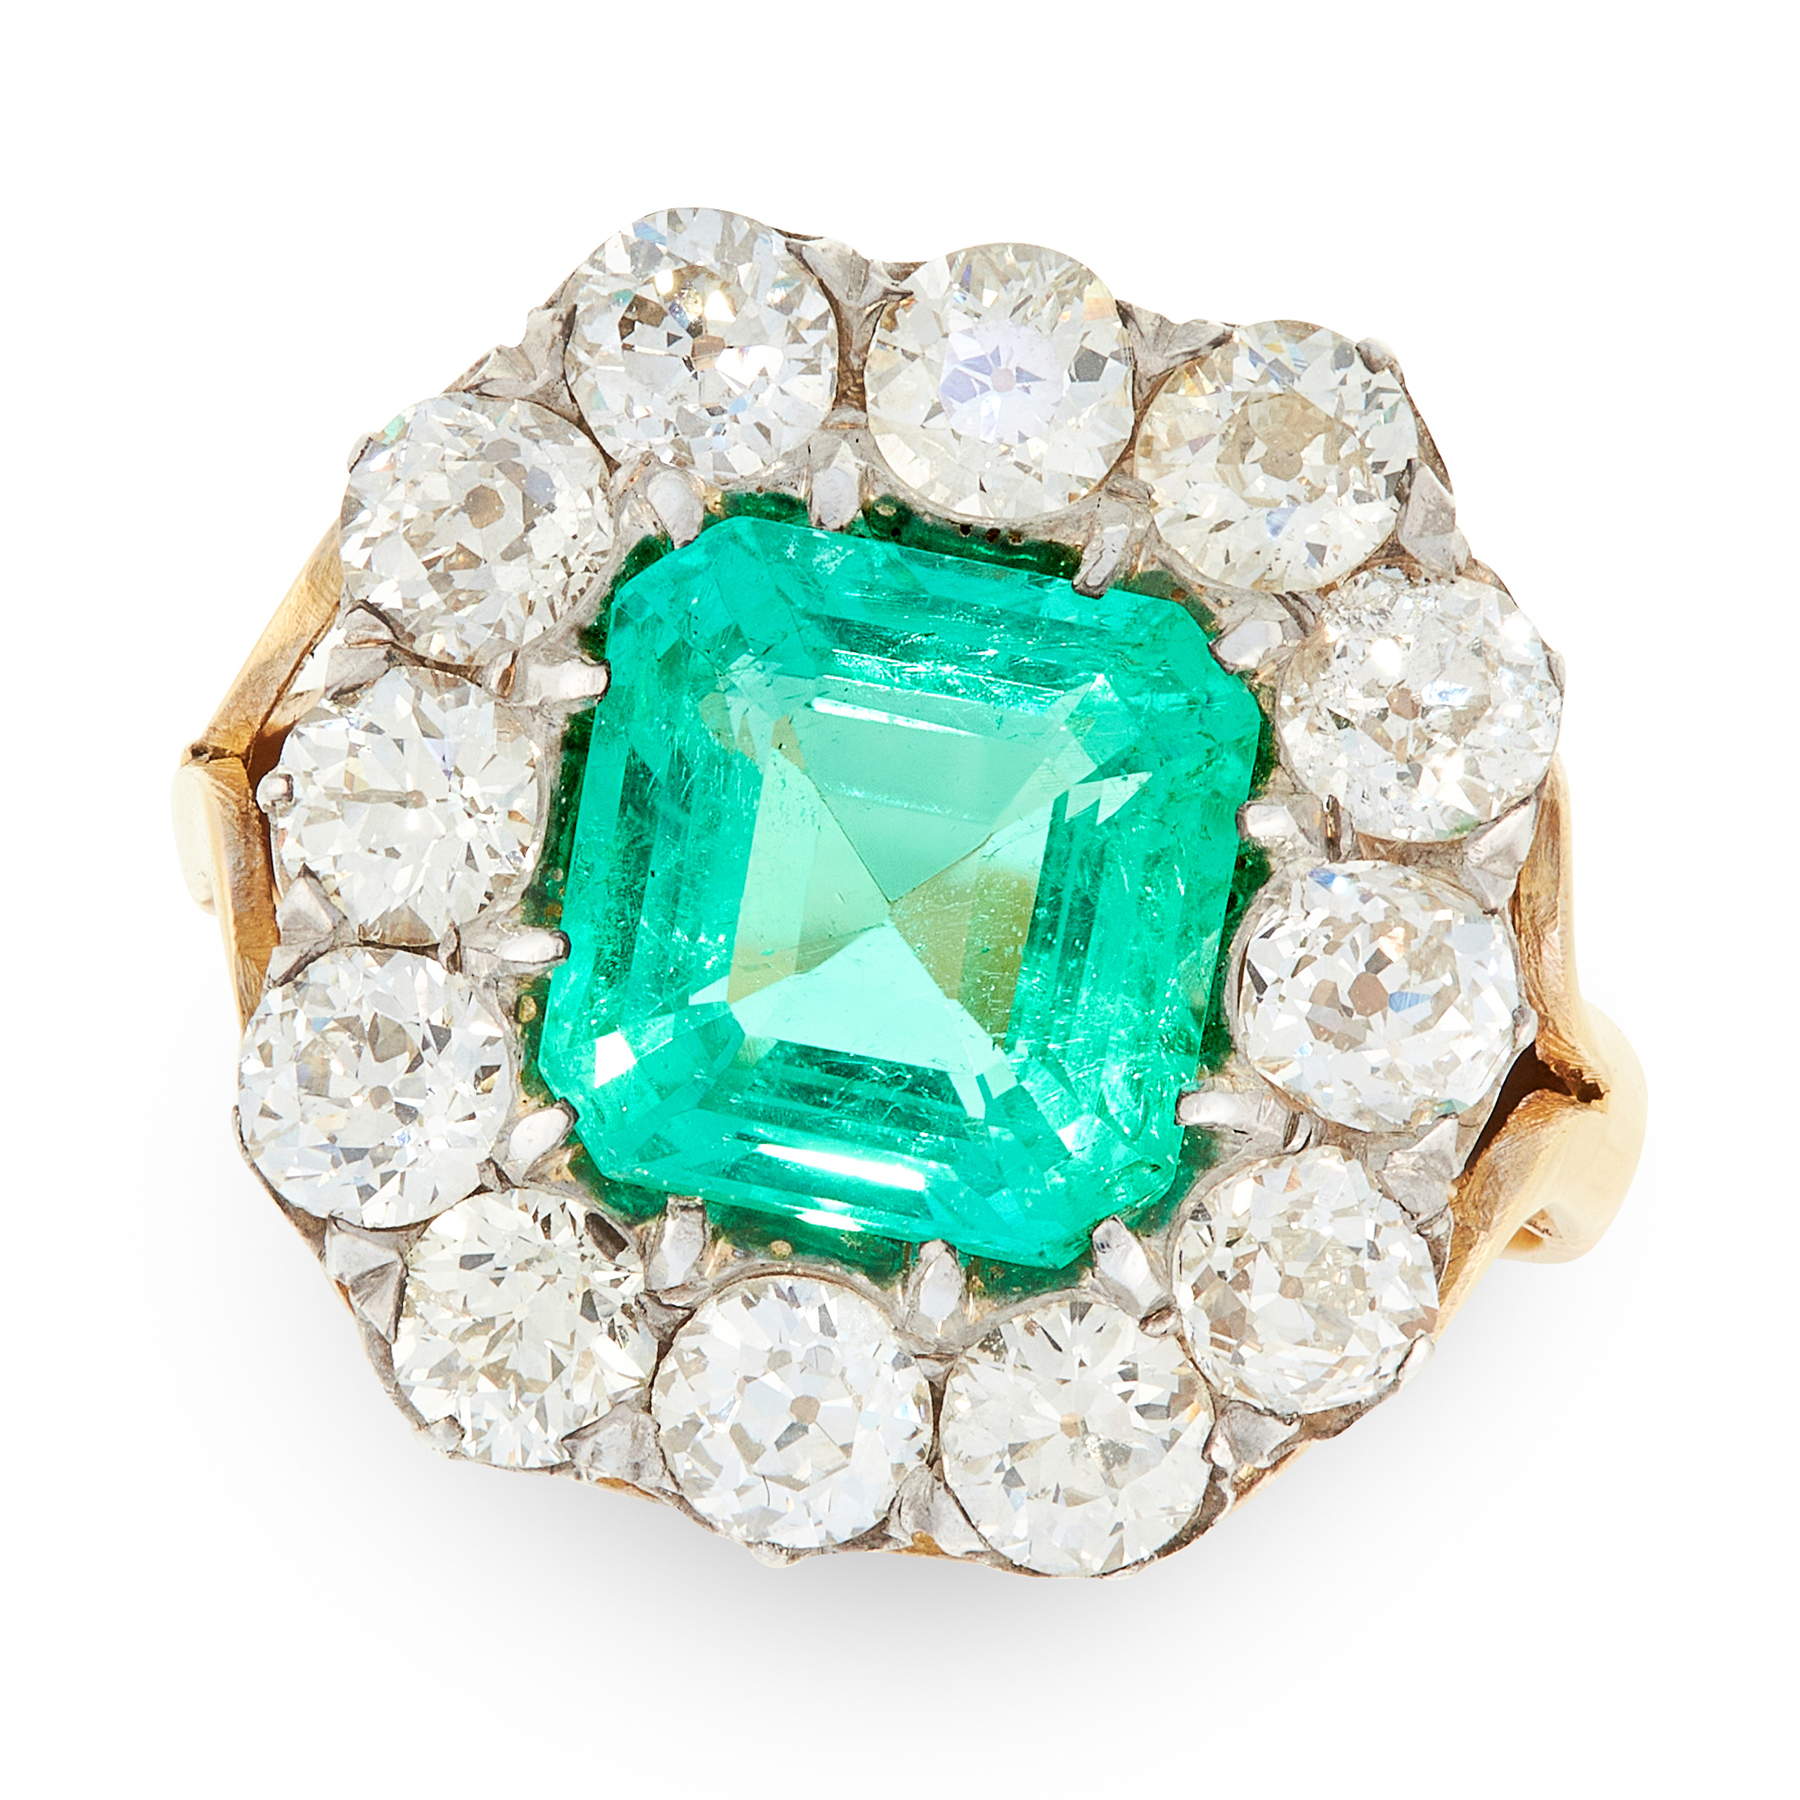 A COLOMBIAN EMERALD AND DIAMOND CLUSTER RING in 18ct yellow gold and silver, set with an emerald cut